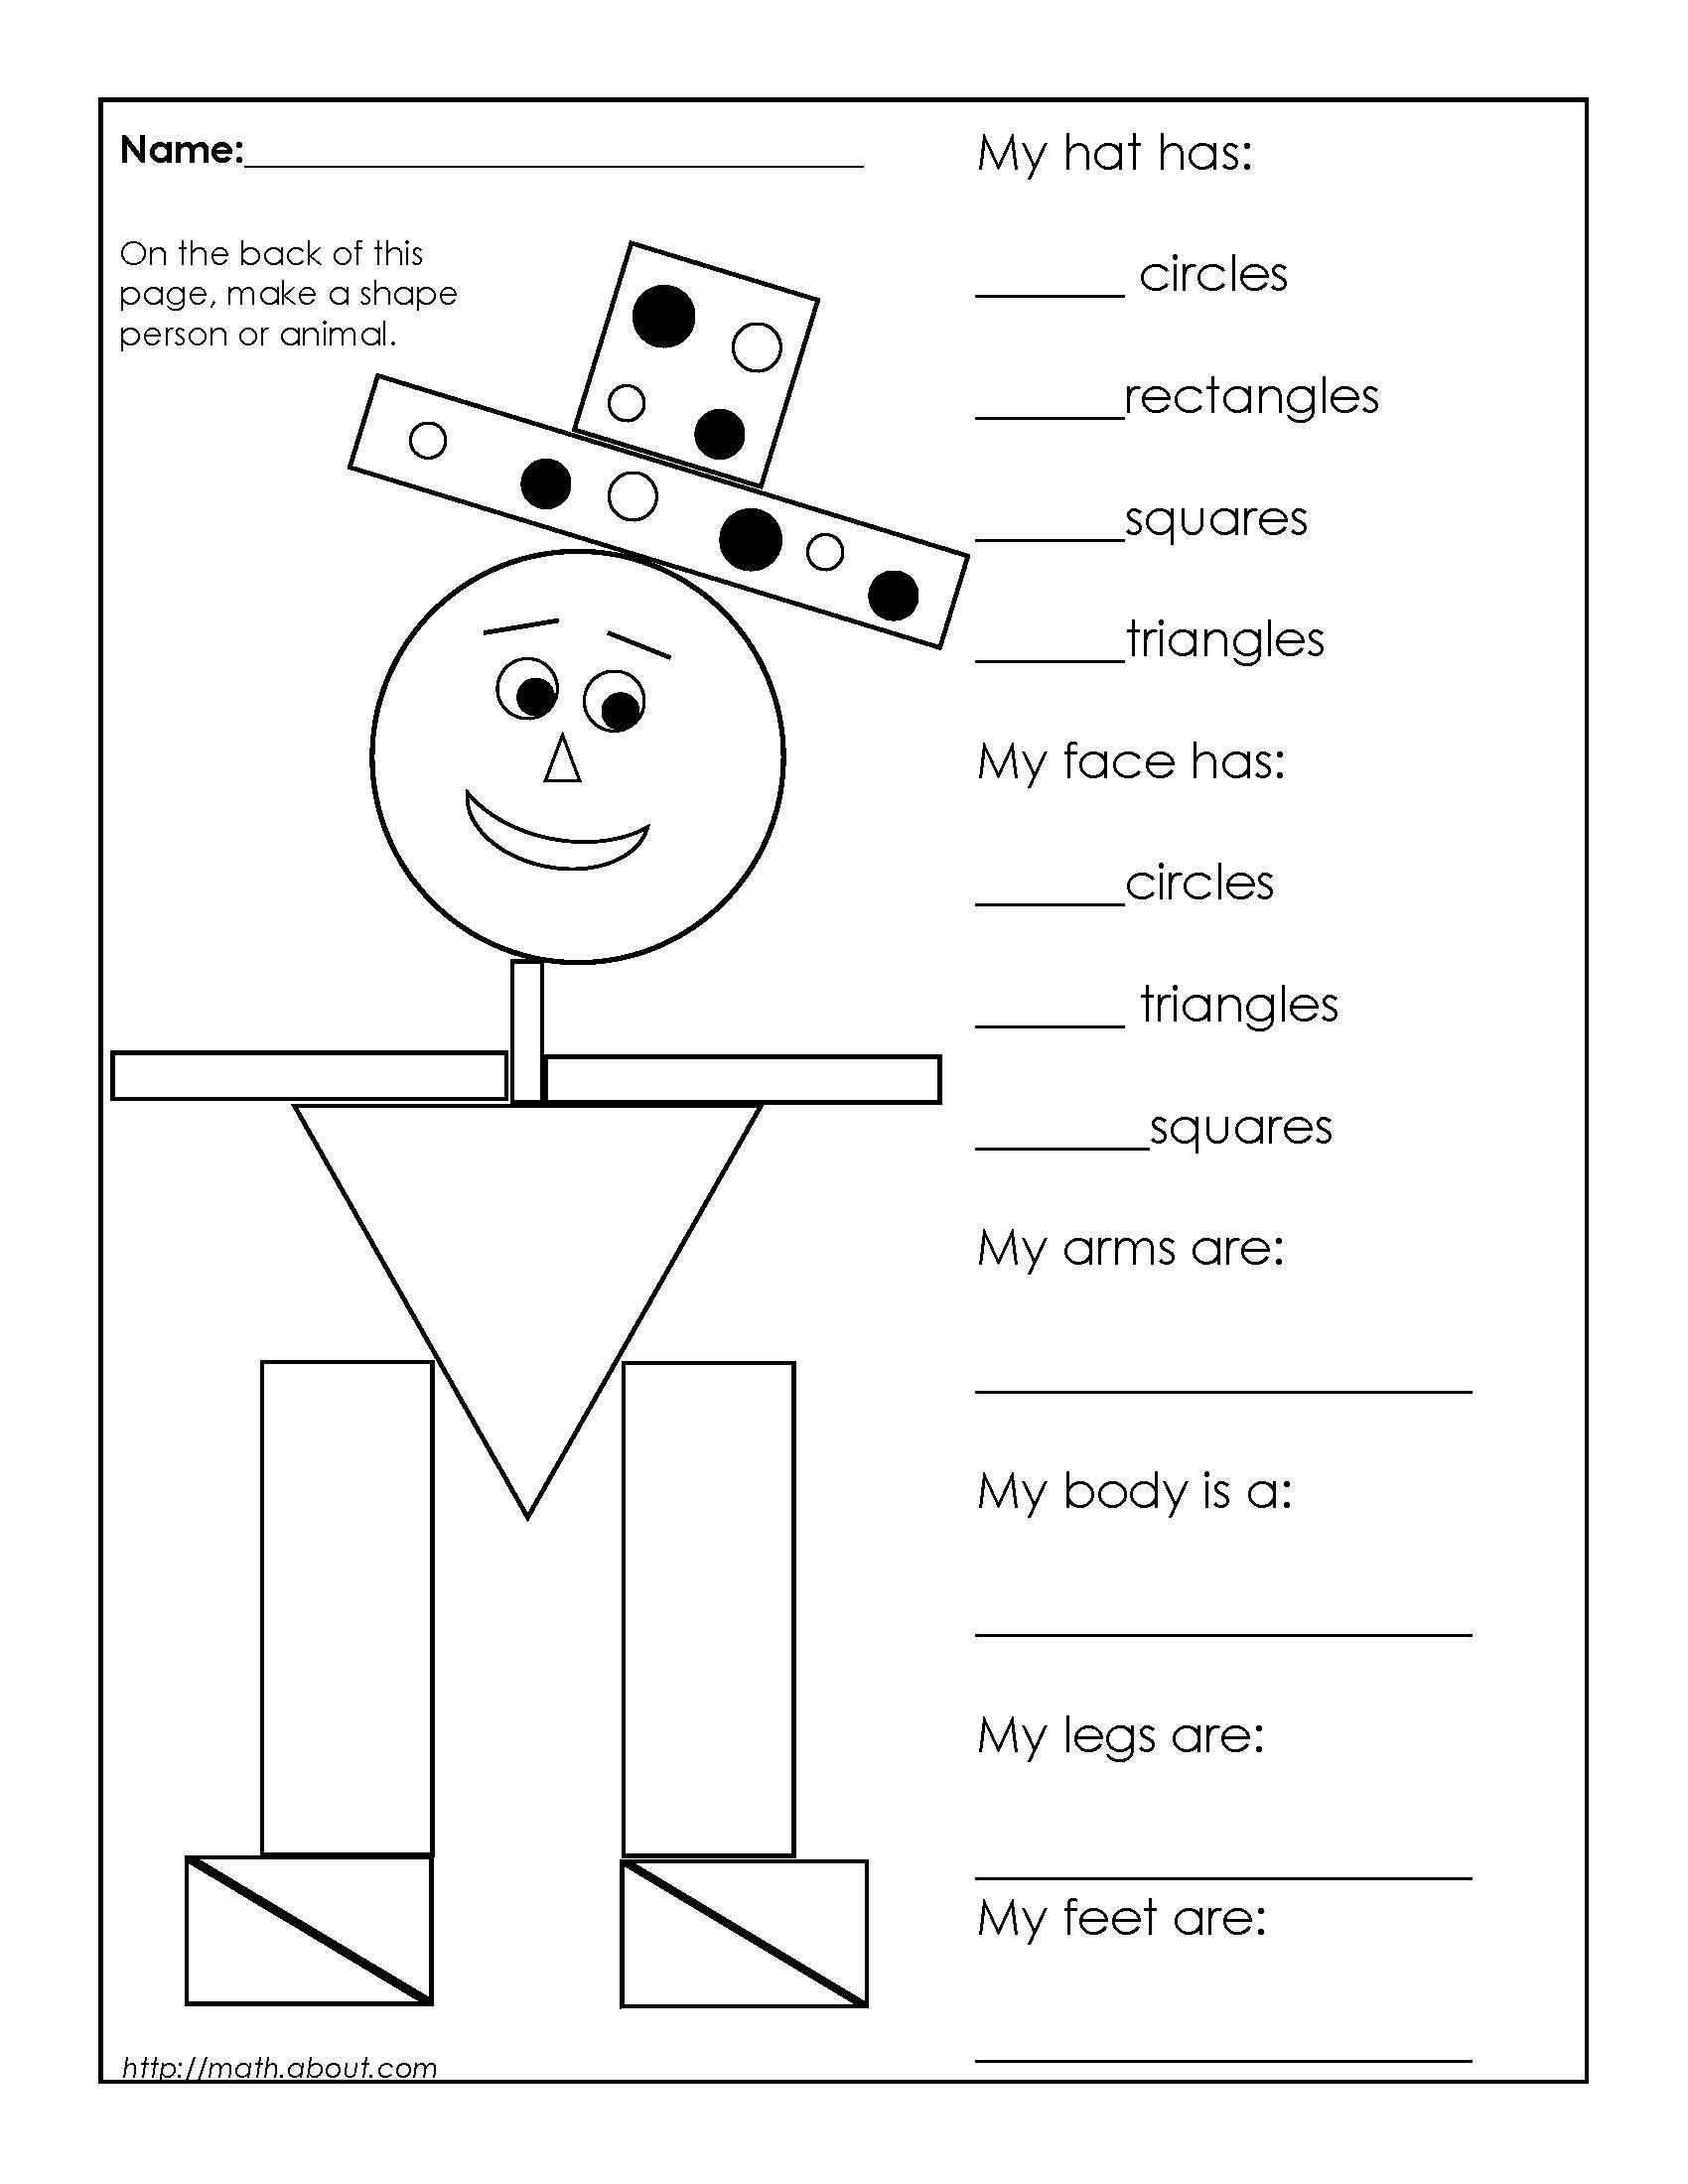 Free 1st Grade Comprehension Worksheets Along with 1st Grade Geometry Worksheets for Students